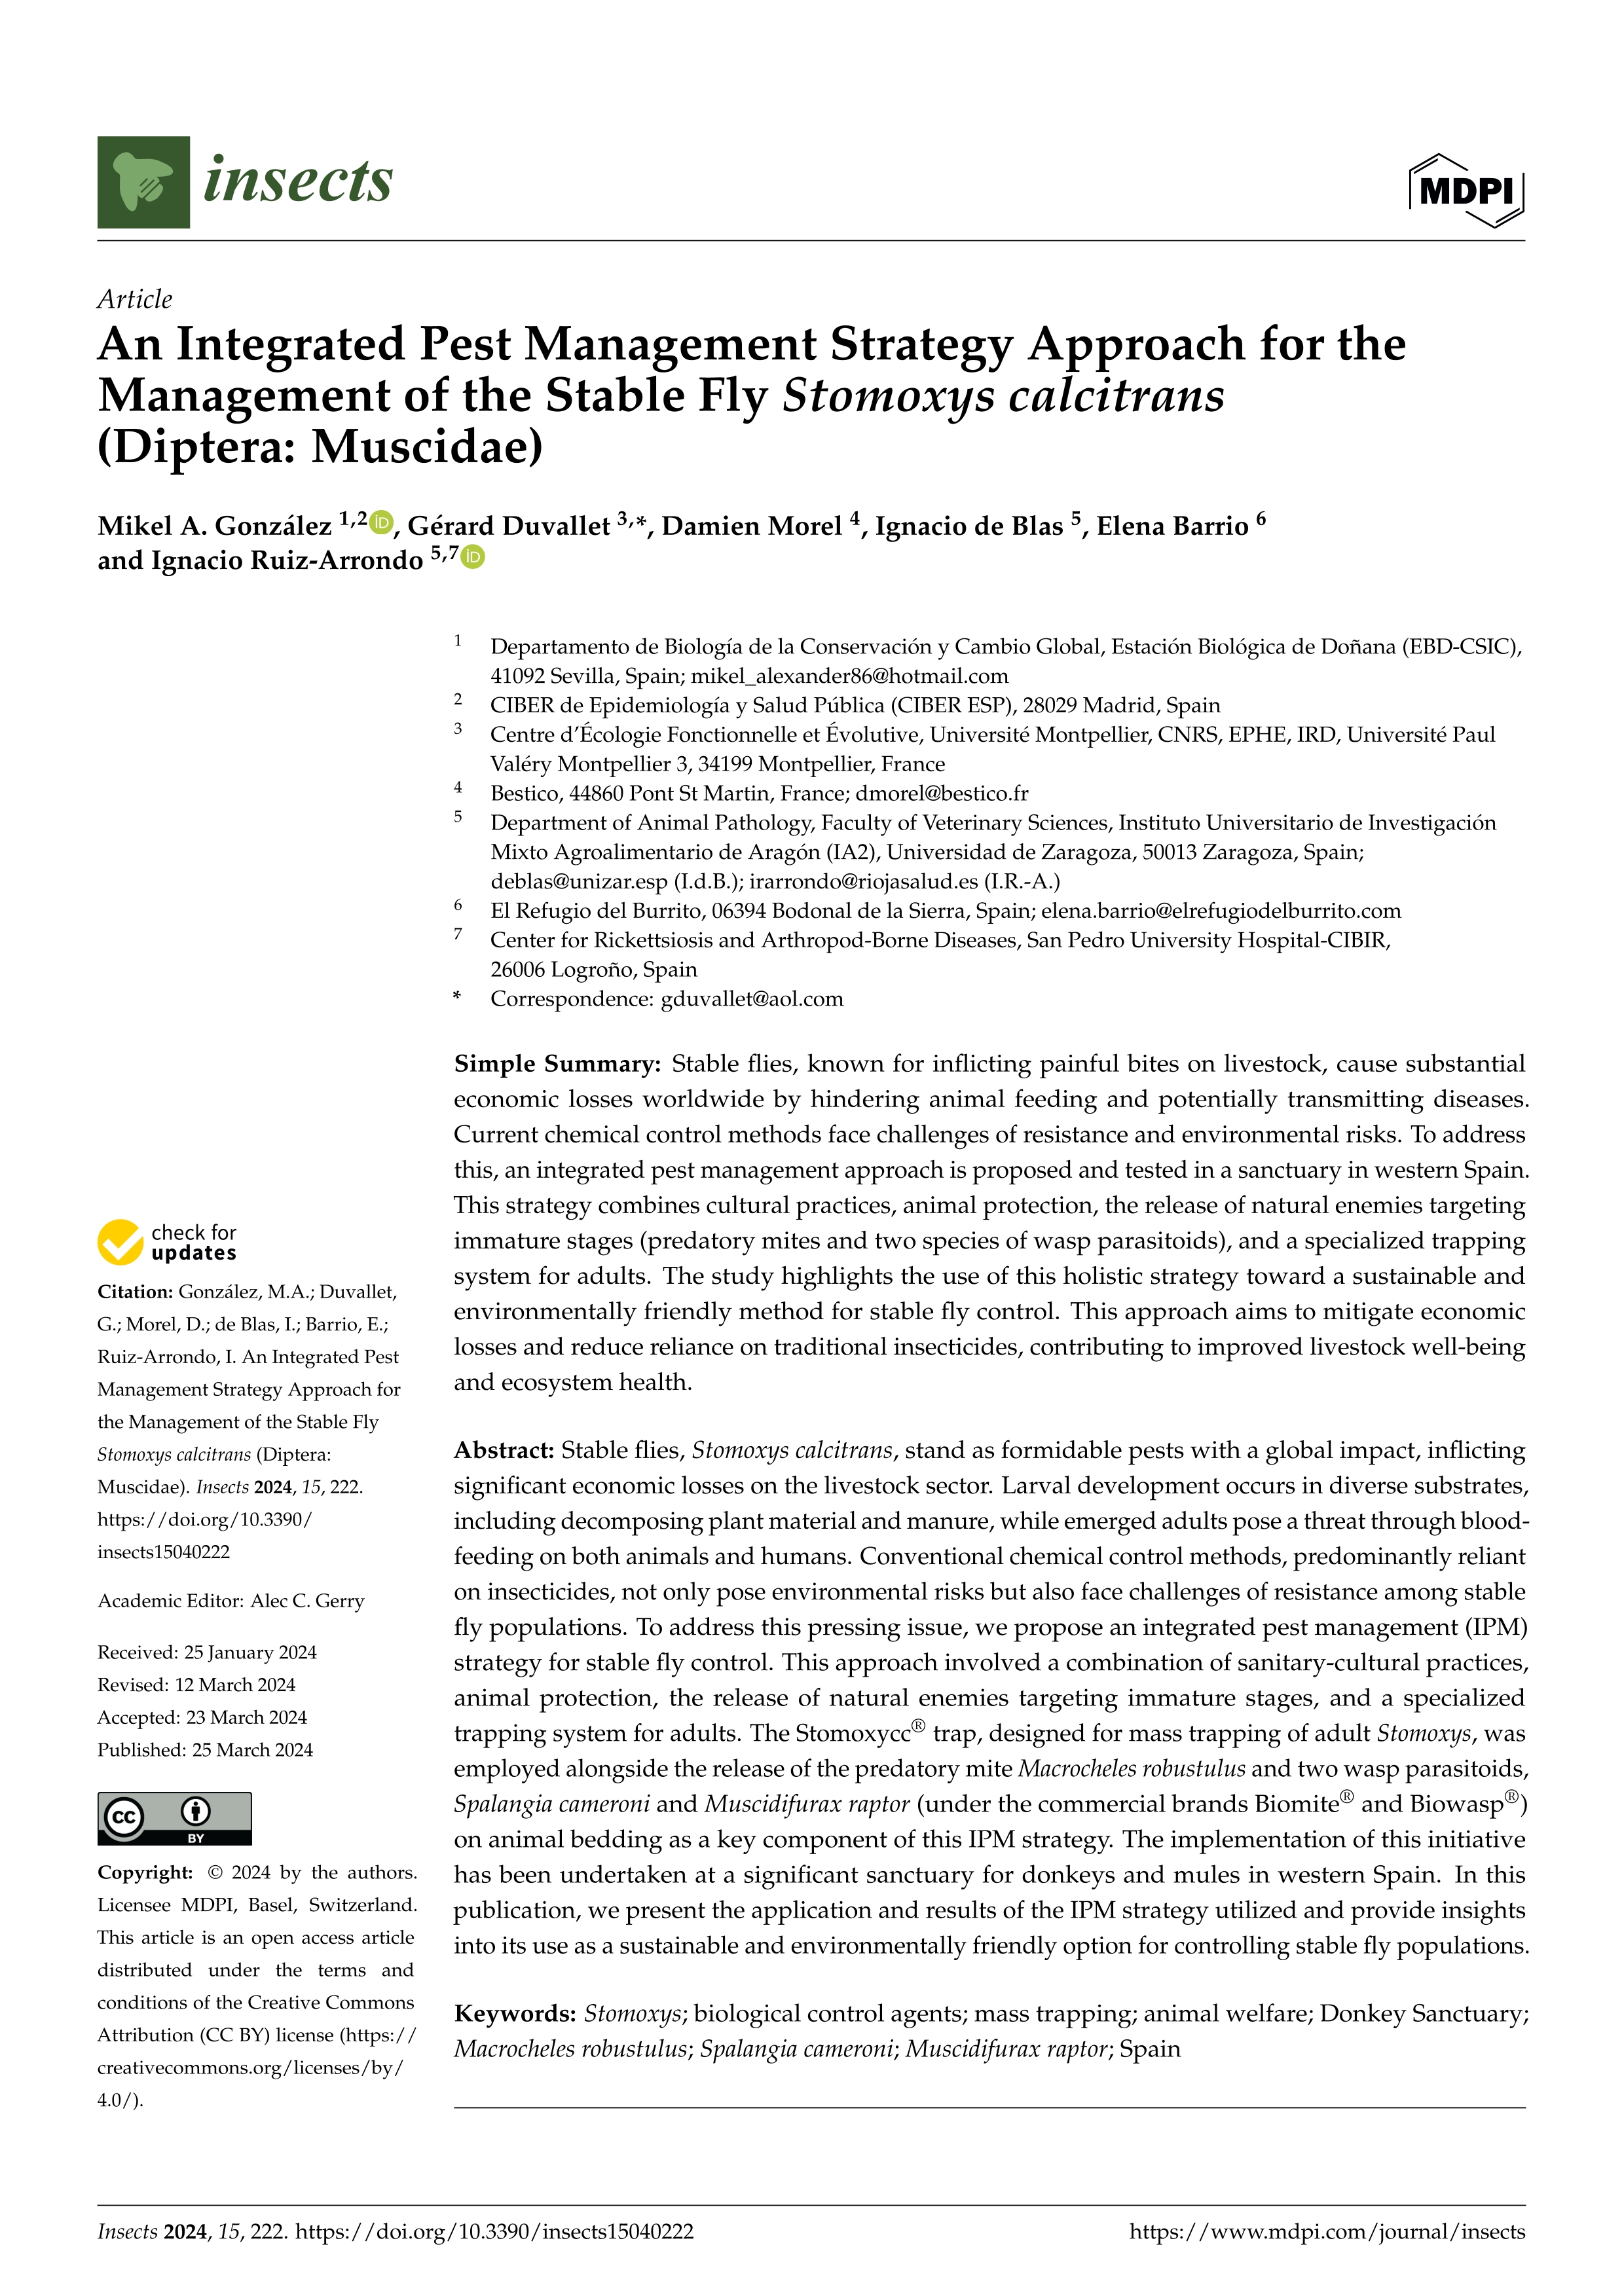 An Integrated Pest Management Strategy Approach for the Management of the Stable Fly Stomoxys calcitrans (Diptera: Muscidae)